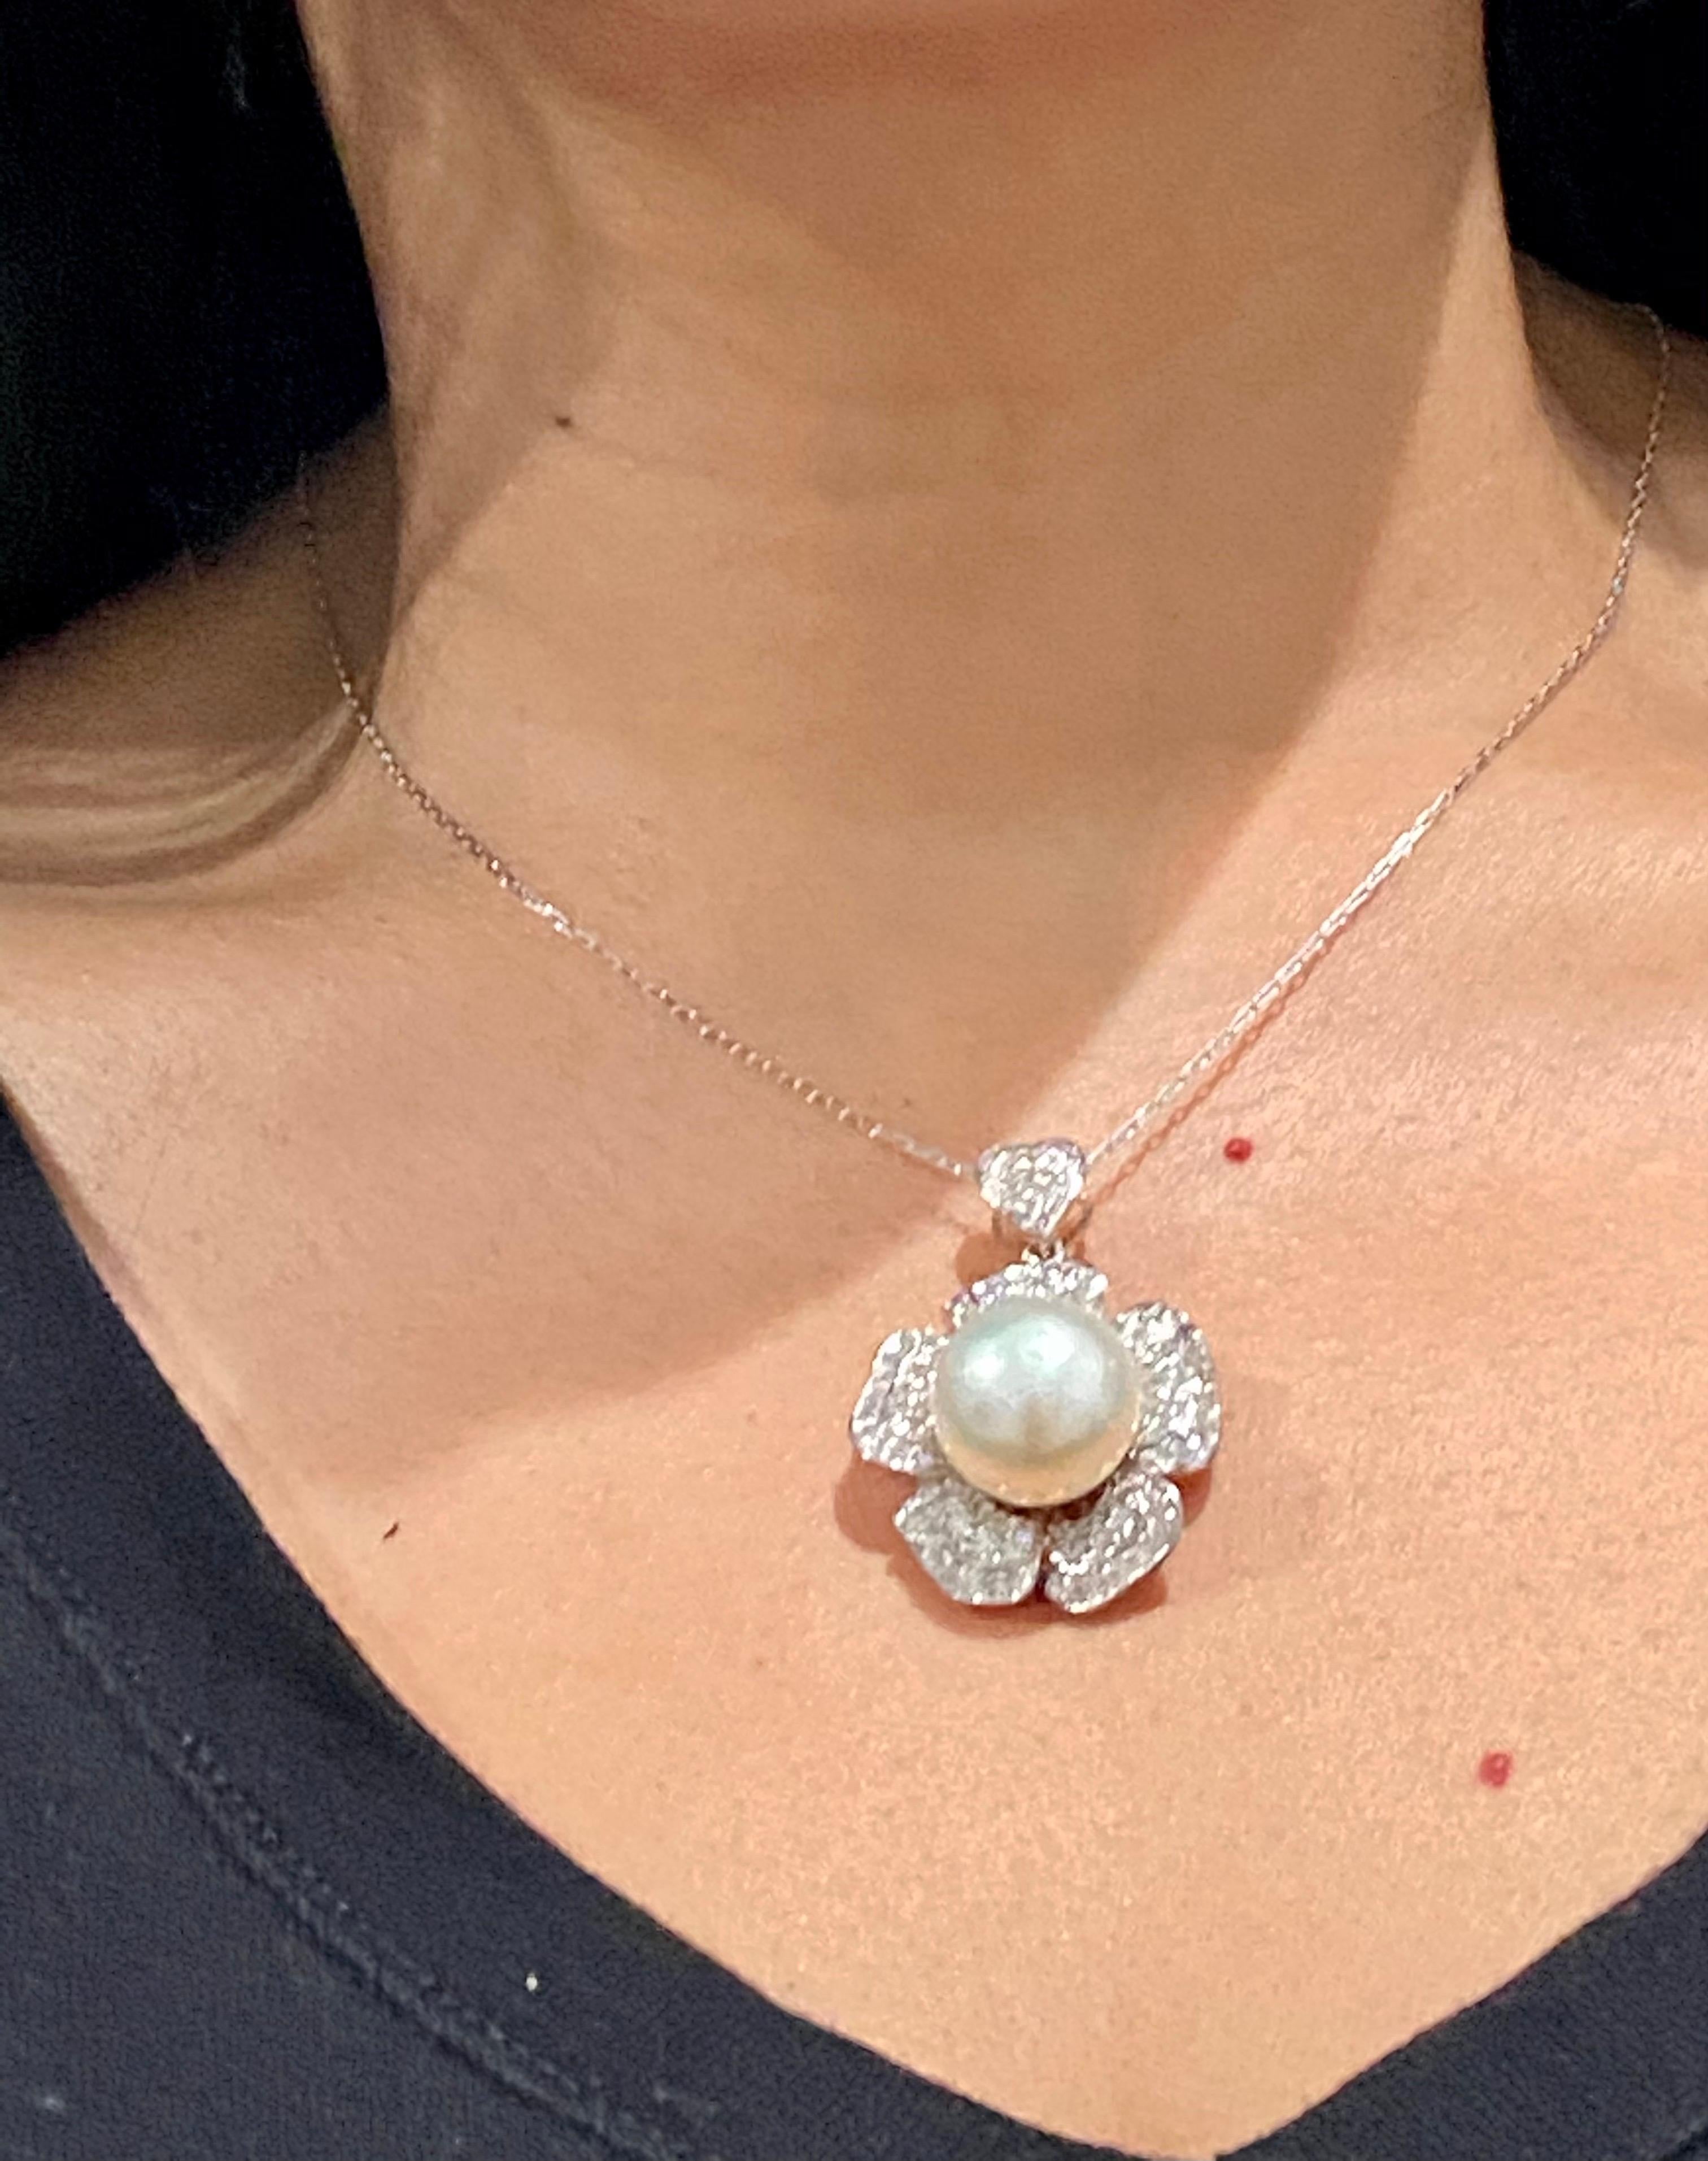 A stunning 2.17 Carat Diamond and South Sea Pearl 18 Karat White Gold Pendant

This one of a kind beauty has a magnificent 15mm South Sea Pearl in the center. It is surrounded by 104 Round Cut Diamonds that weigh 2.17 Carats that are set in a petal